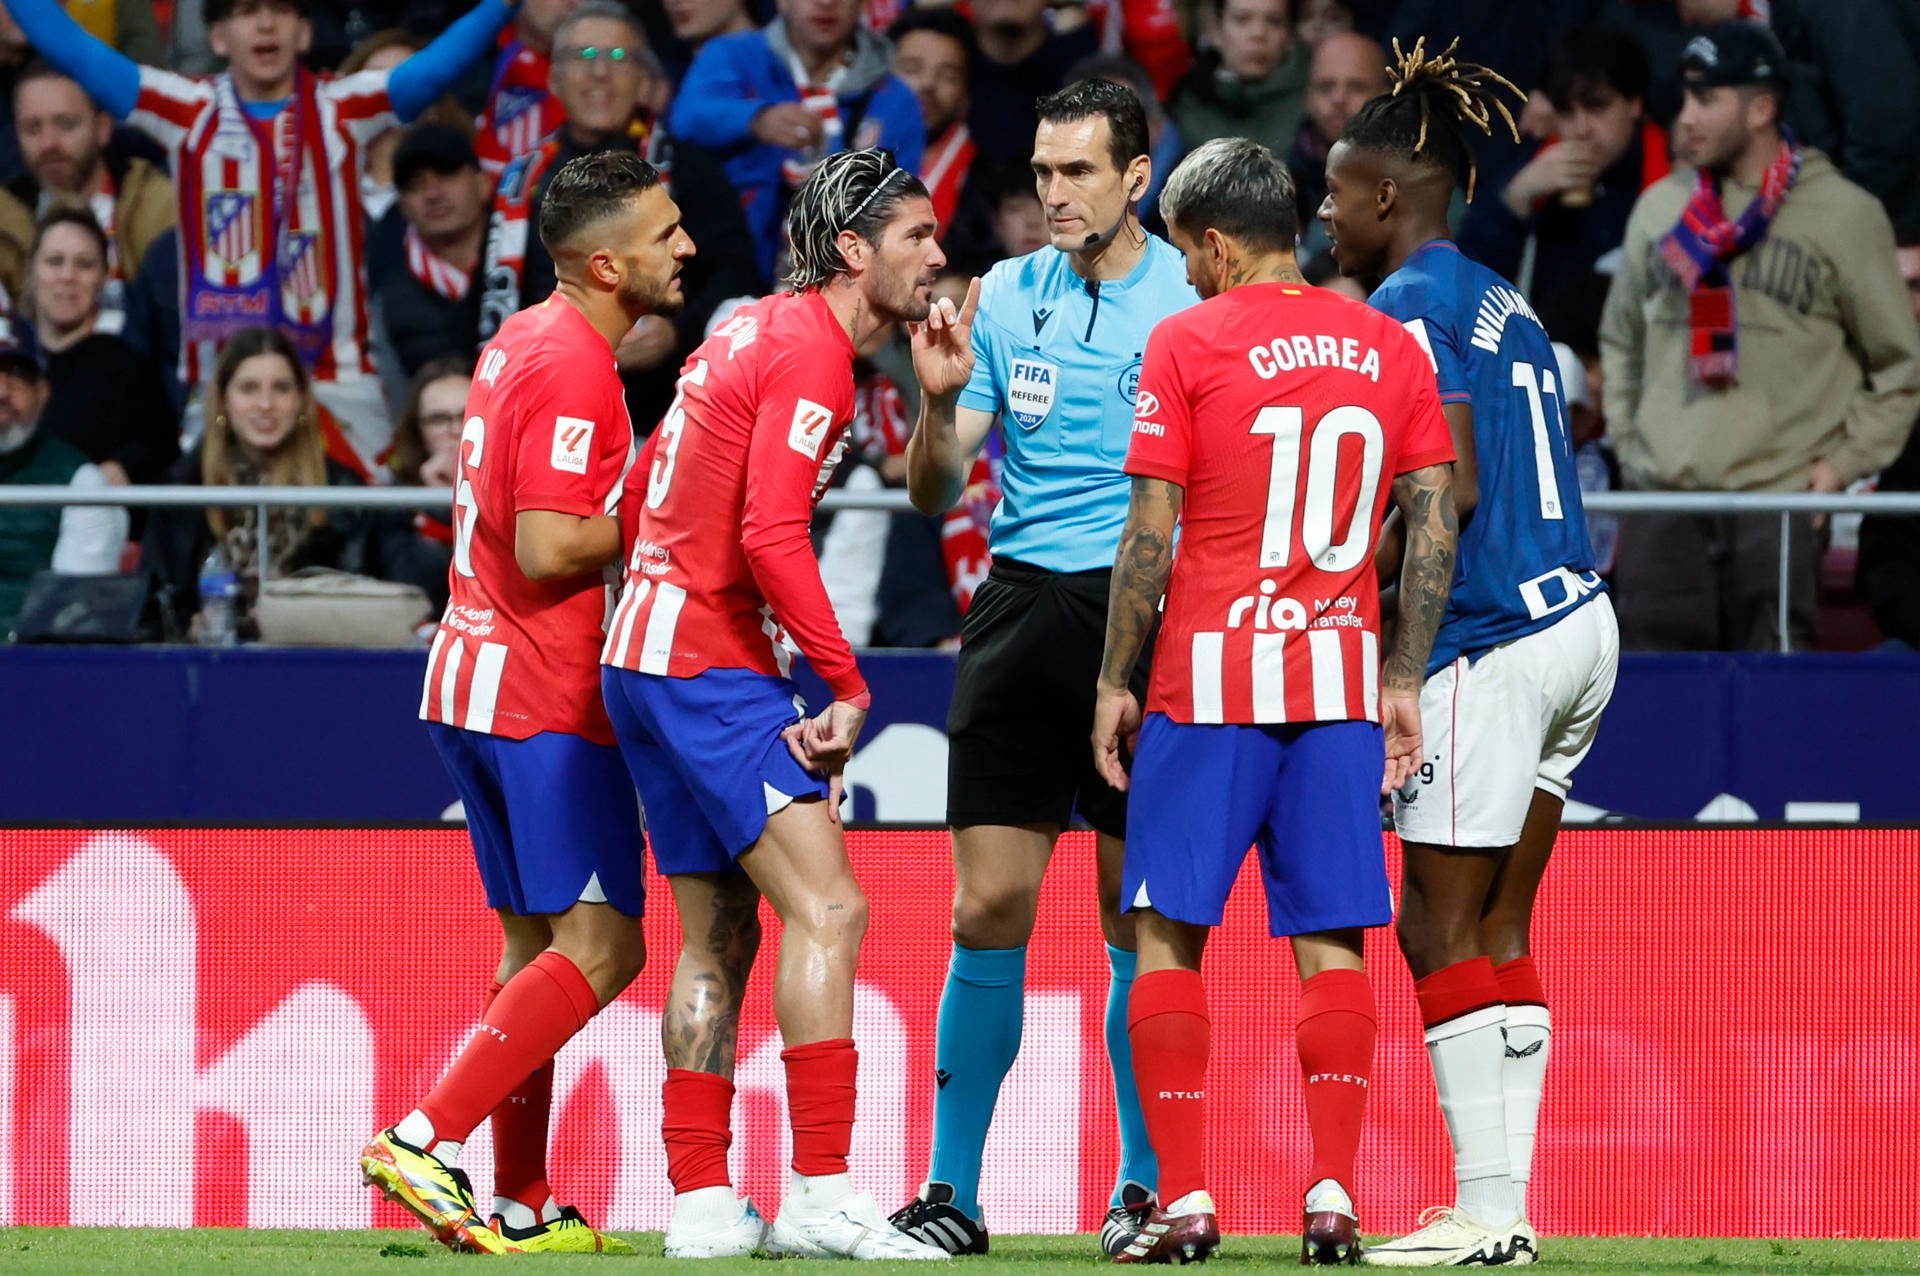 Atletico Madrid are looking for a reliable striker to reinforce their attacking options for next season. However, one of the conditions must be that he should not be excessively expensive, so three options are gaining momentum: Samu Omorodion, Giuliano Simeone and Carlos Martín.